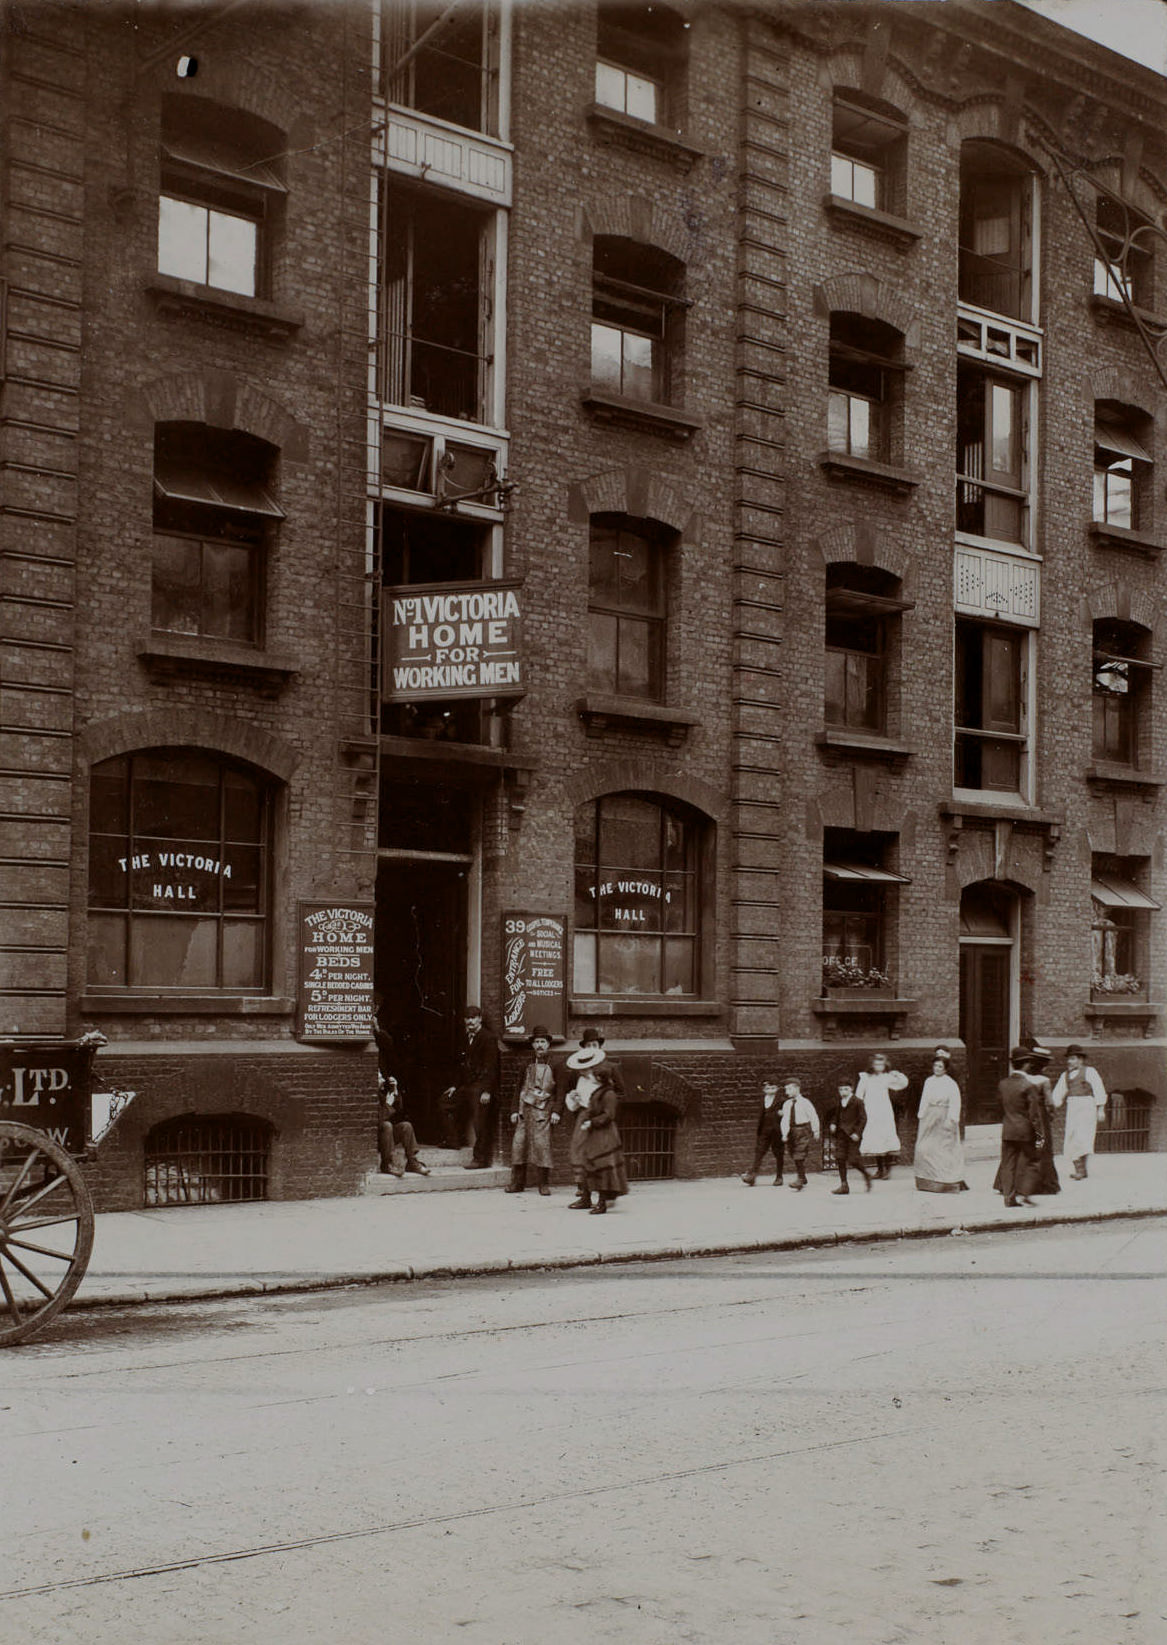 A group of men stand out on the stoop of a four-story brick building, while a few women and children walk by on the sidewalk.